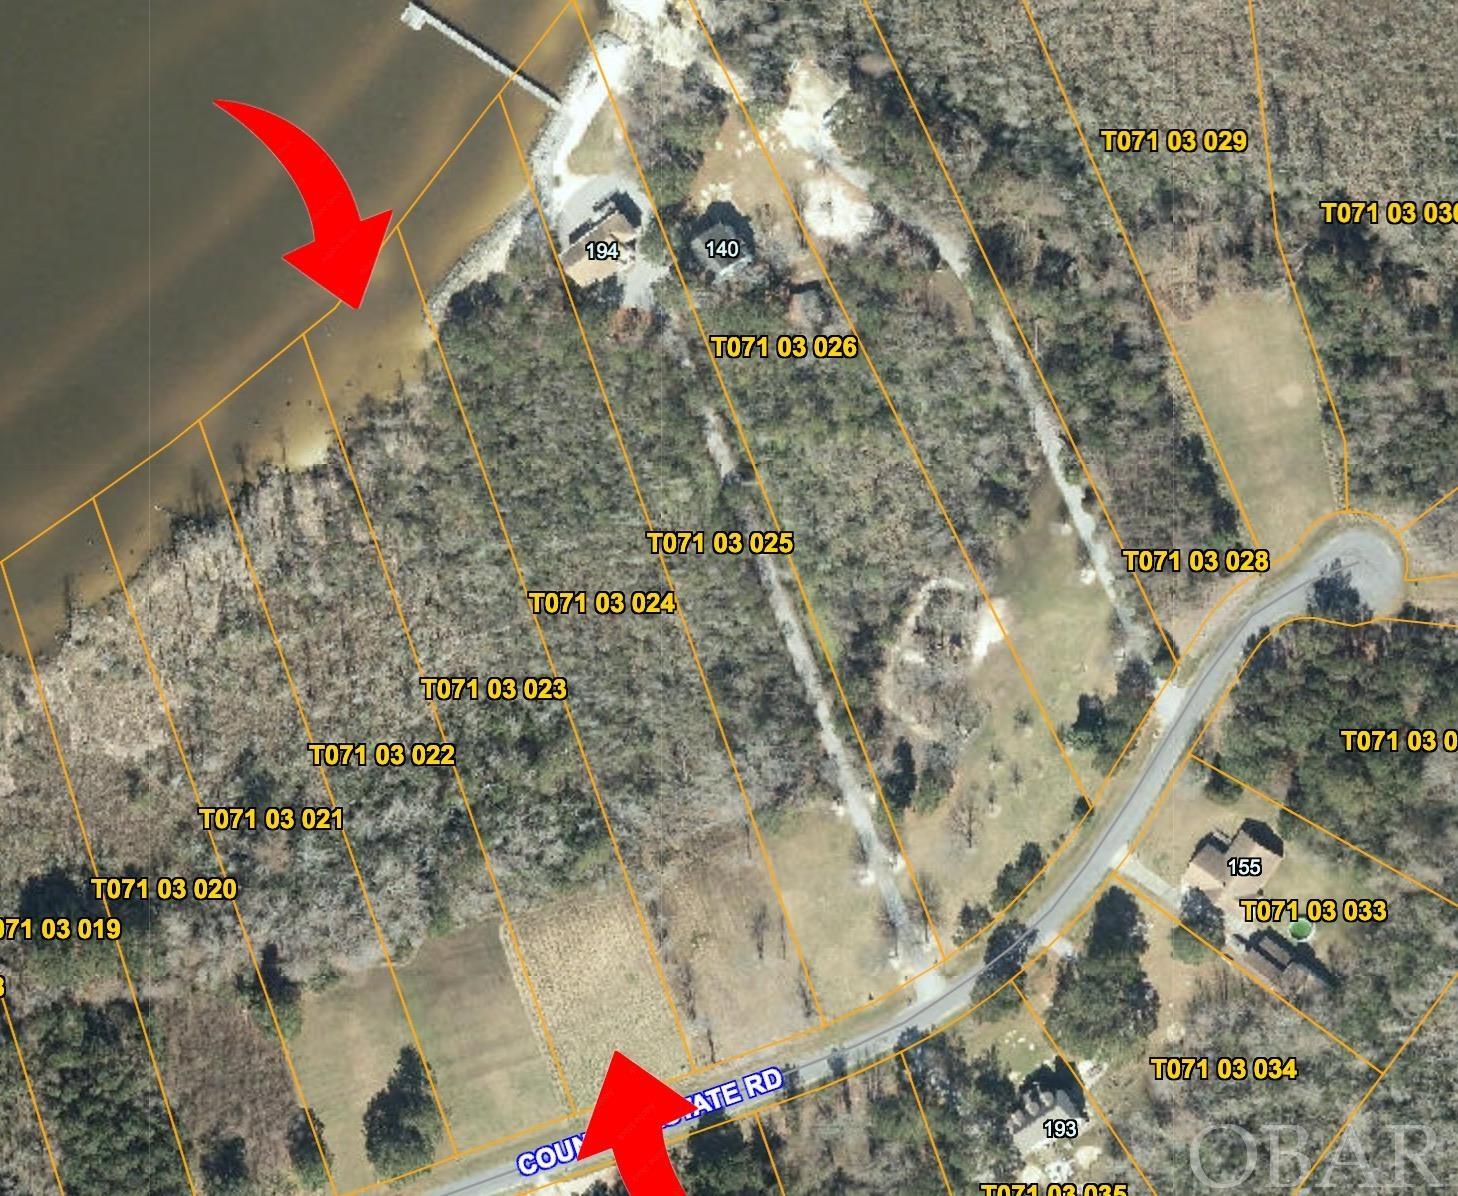 1.56 acre lot, semi cleared, on the Albemarle Sound! Lot is ready to be built upon. County water and utilities are available. Septic approves 3 bedroom house. Possibility for 4 or 5 bedroom with appropriate septic application and survey.  Sound access in the NE corner of the neighborhood is maintained by HOA. Potential for ultra private compound with the addition of gravel road running towards the sound. Magnificent water views and quaint neighborhood. SELLER FINANCING AVAILABLE!!! Terrific opportunity to build your eastern NC sound-front dream home, at an affordable lot price.